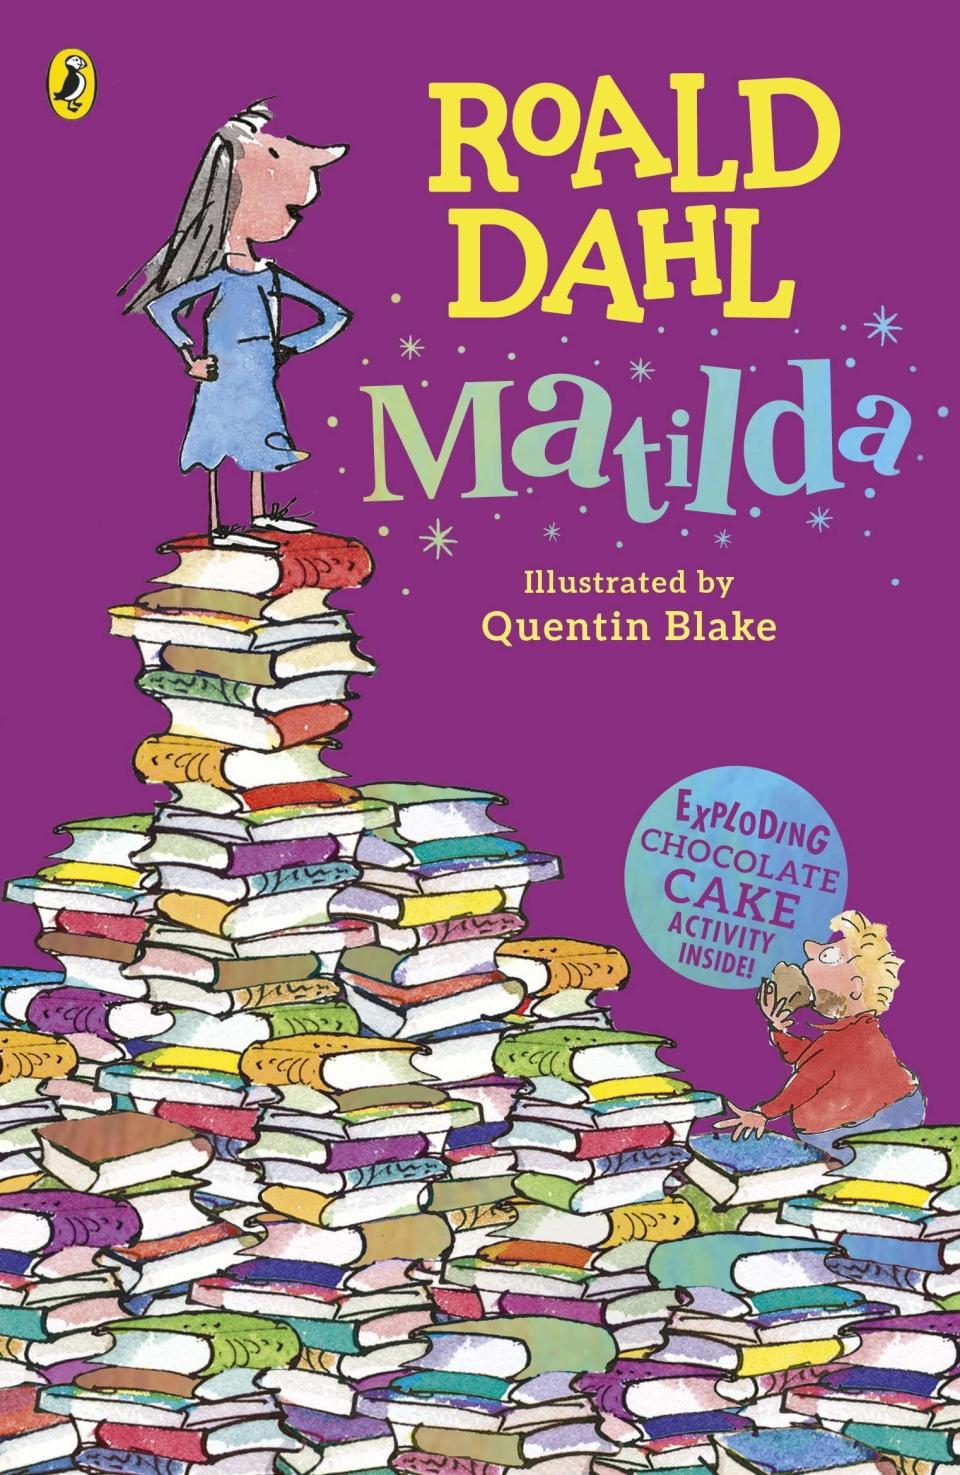 The cover of "Matilda" by Roald Dahl.